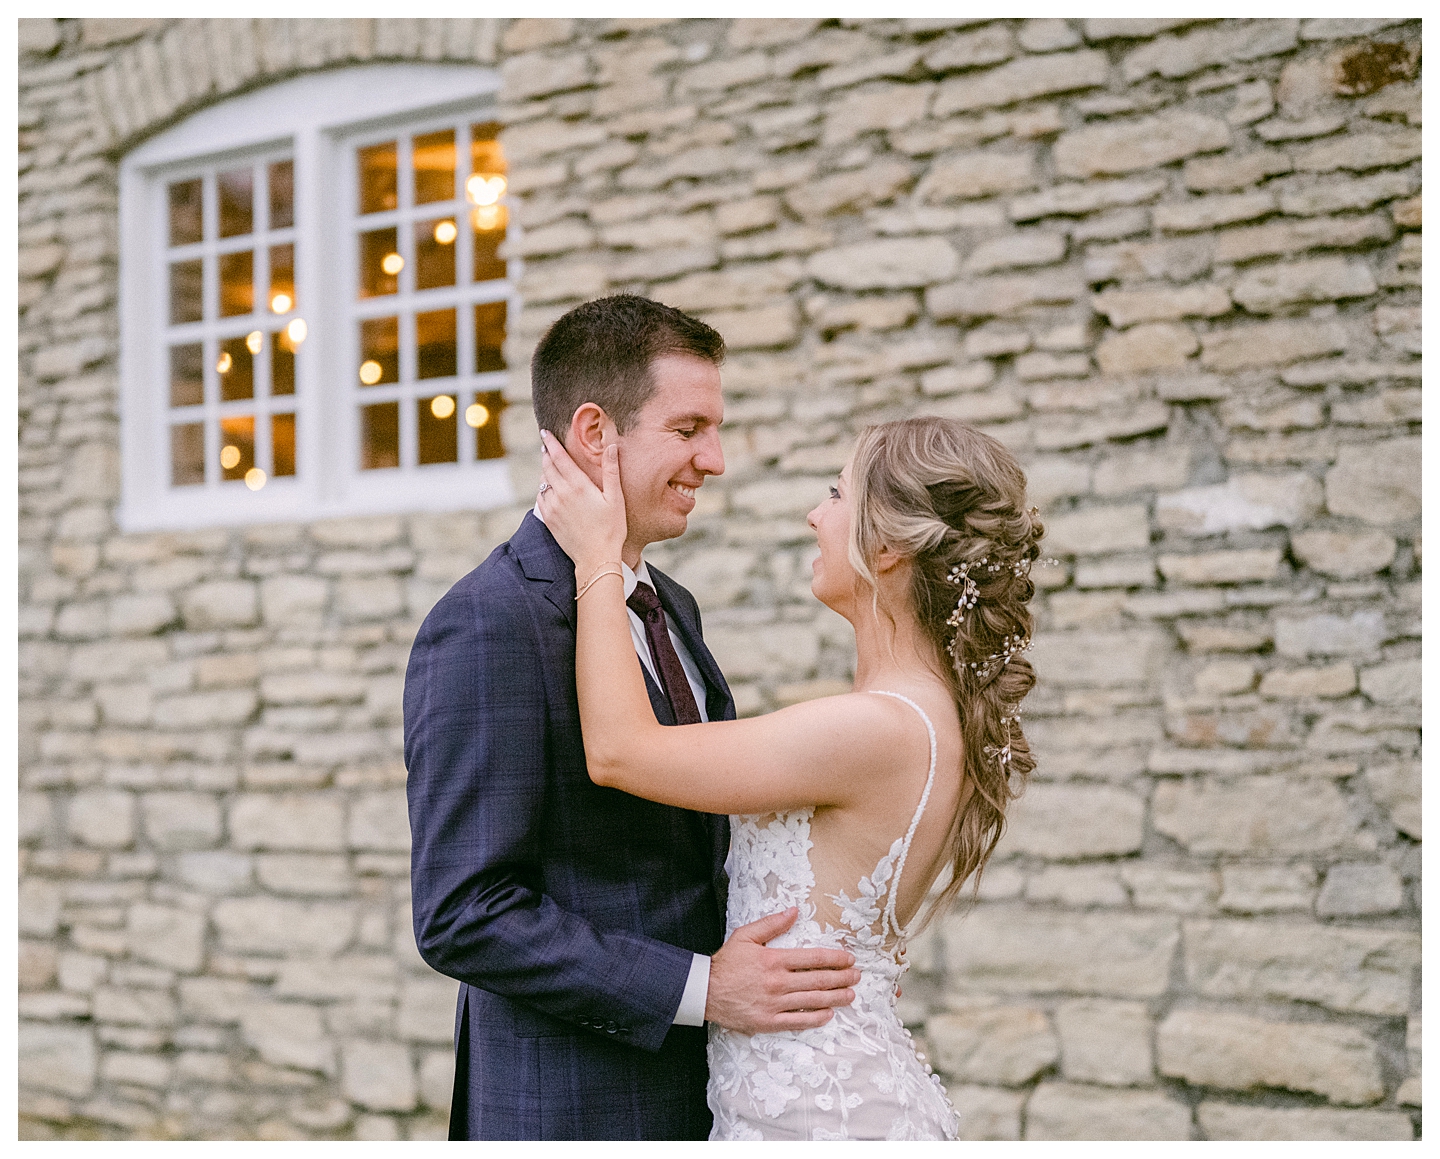 A bride and groom's sunset portrait at a Mayowood Stone Barn Wedding. Photo by Kayla Lee.